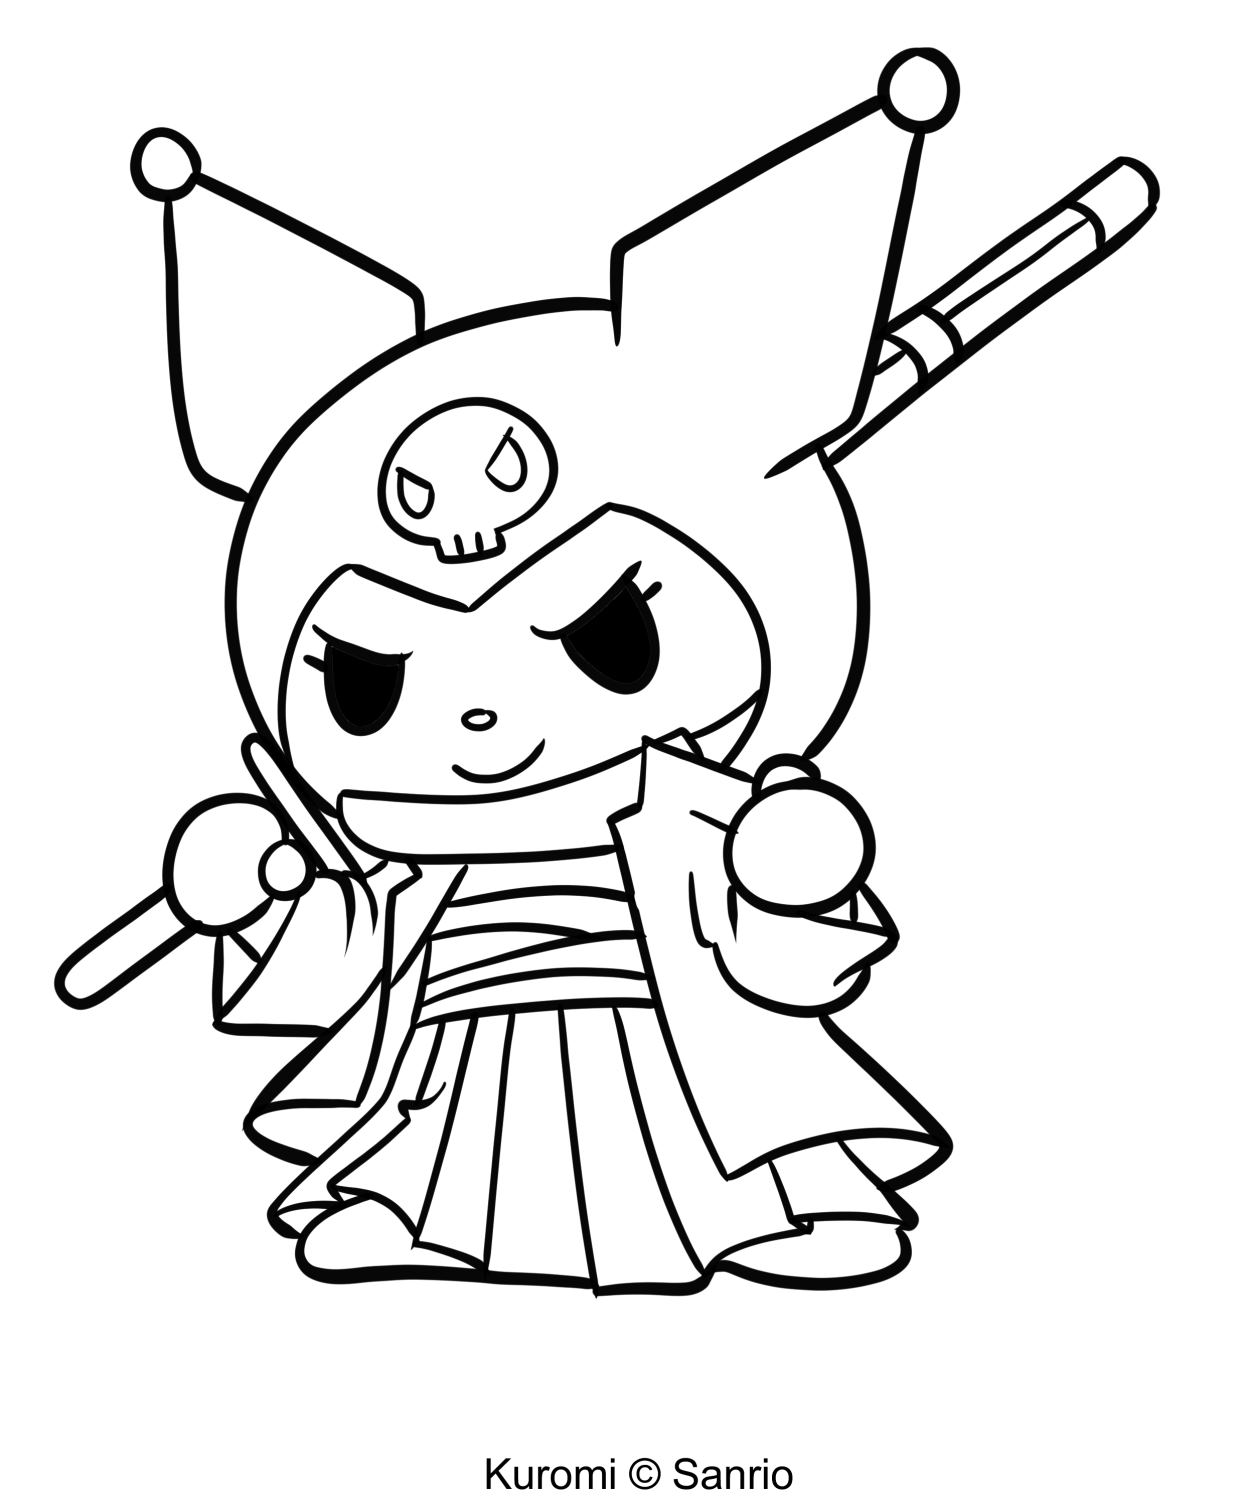 Kuromi Coloring Pages - Coloring Pages Kuromi